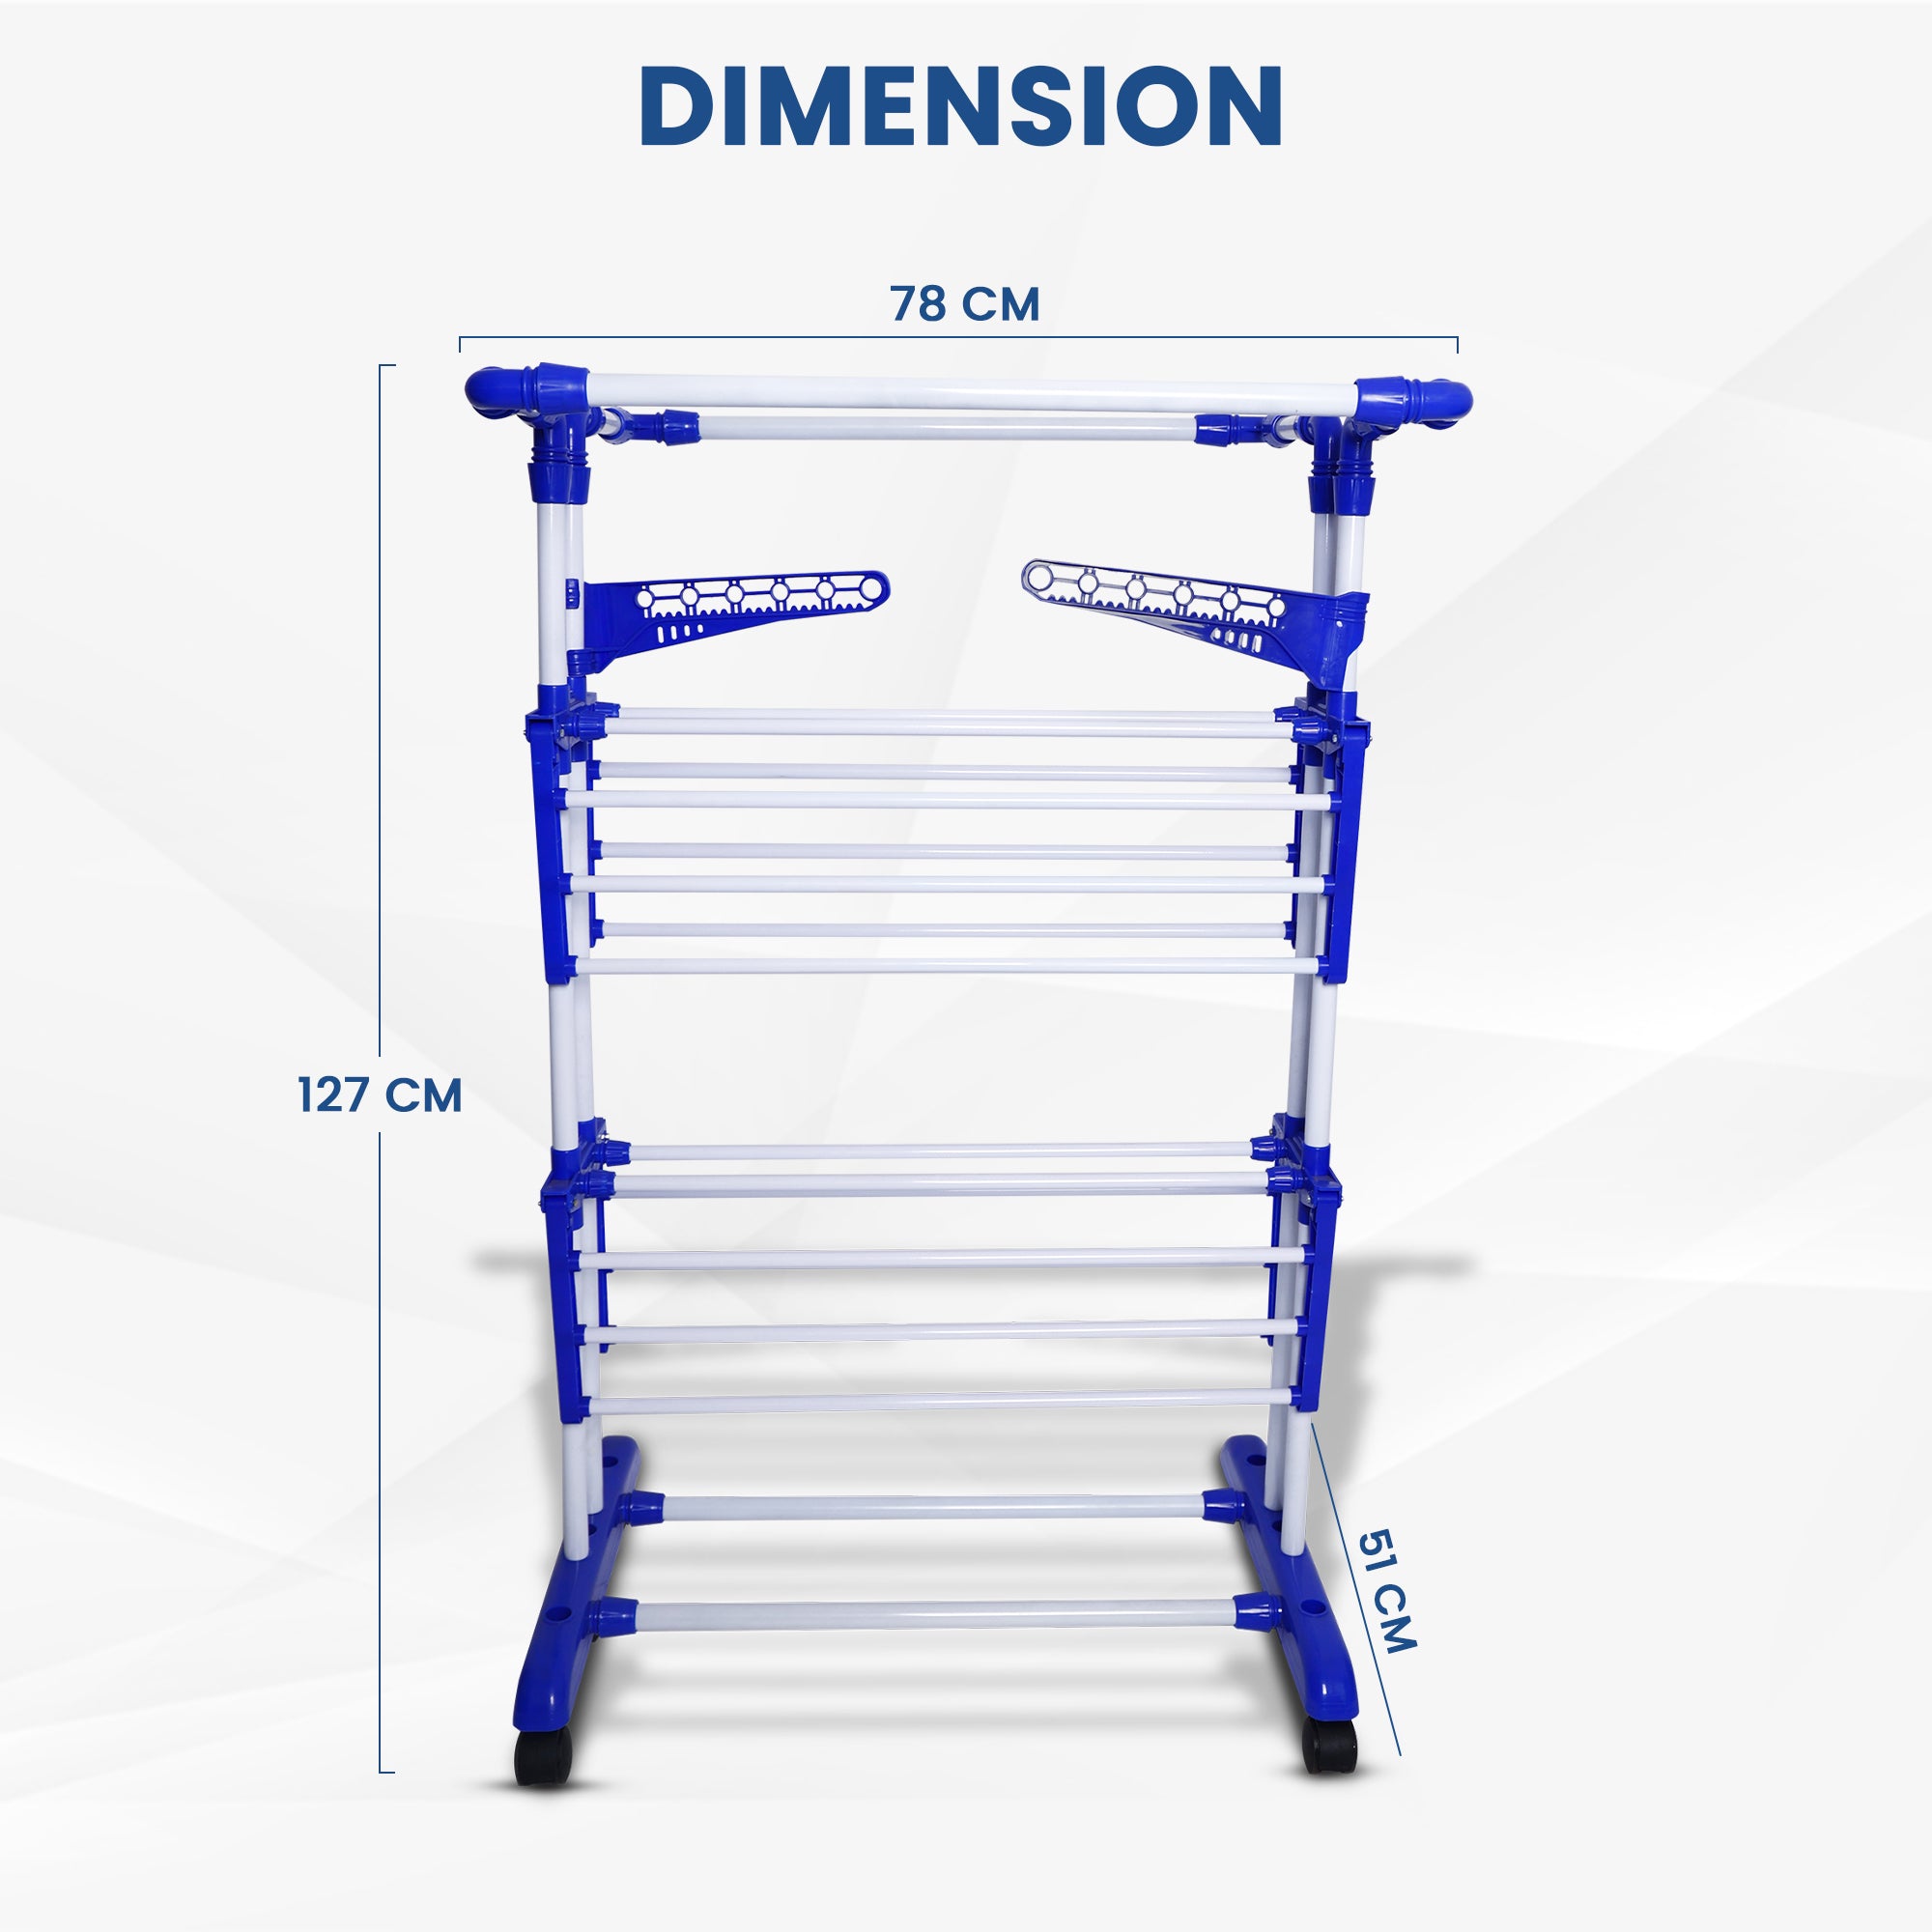 SuperLoad Cloth Drying Stand  | 2+1 Tier Big Foldable Powder Coated Mild Steel I Blue